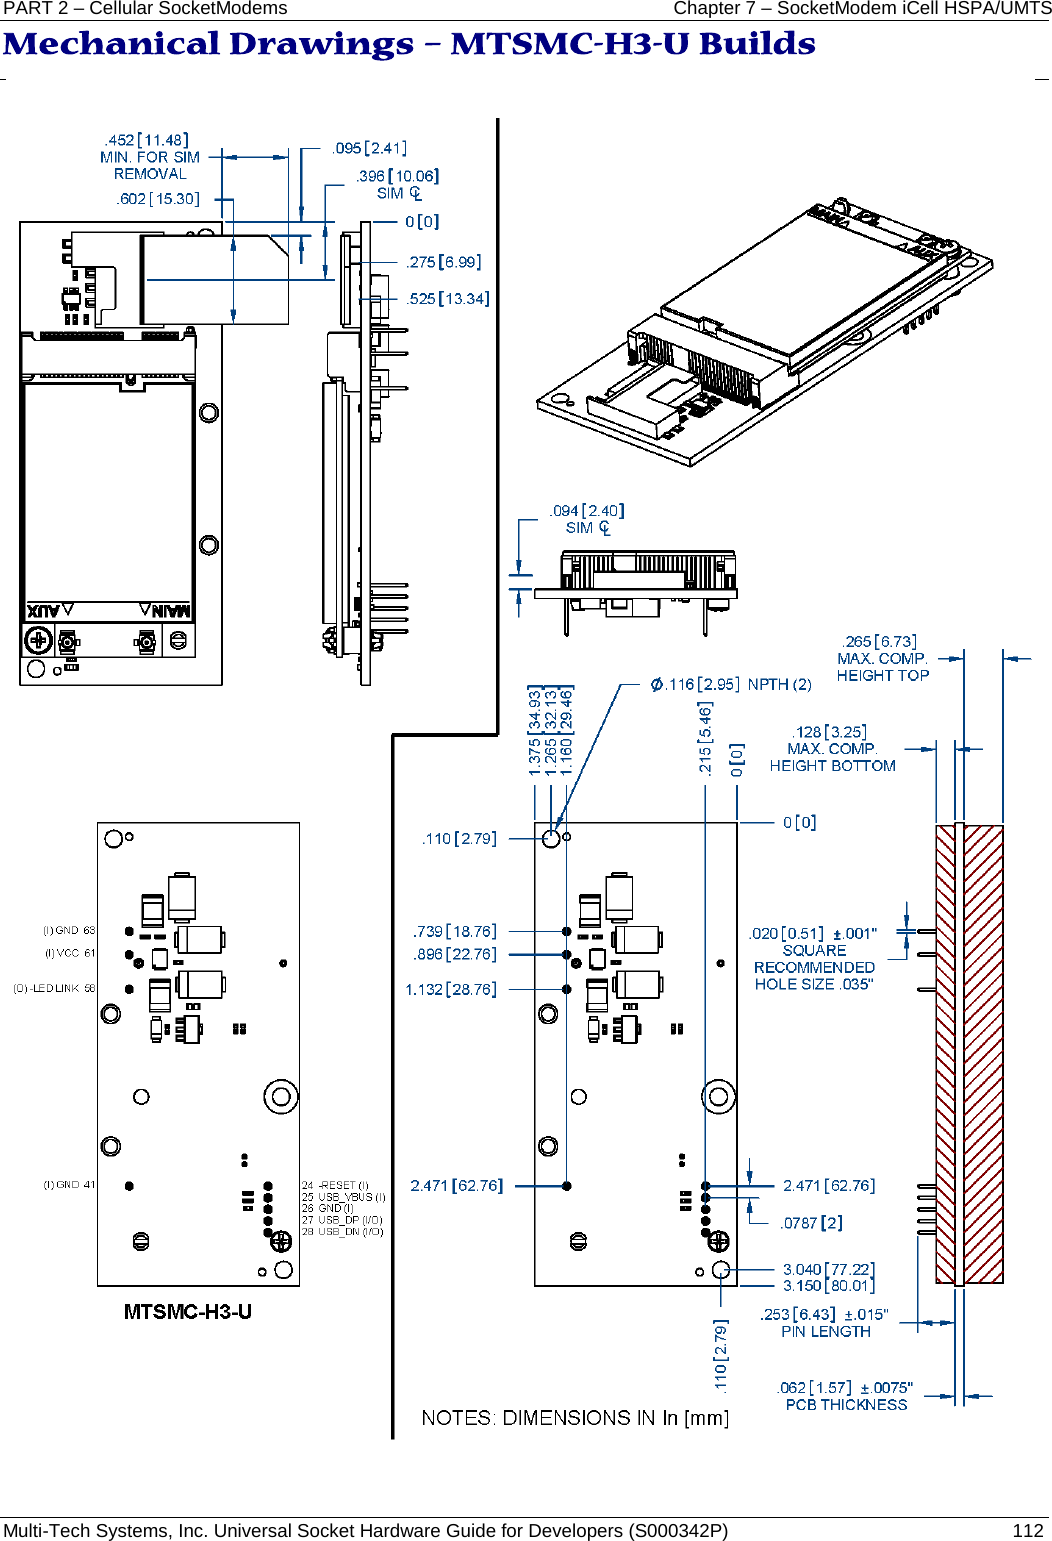 PART 2 – Cellular SocketModems Chapter 7 – SocketModem iCell HSPA/UMTS Multi-Tech Systems, Inc. Universal Socket Hardware Guide for Developers (S000342P)  112 Mechanical Drawings – MTSMC-H3-U Builds   